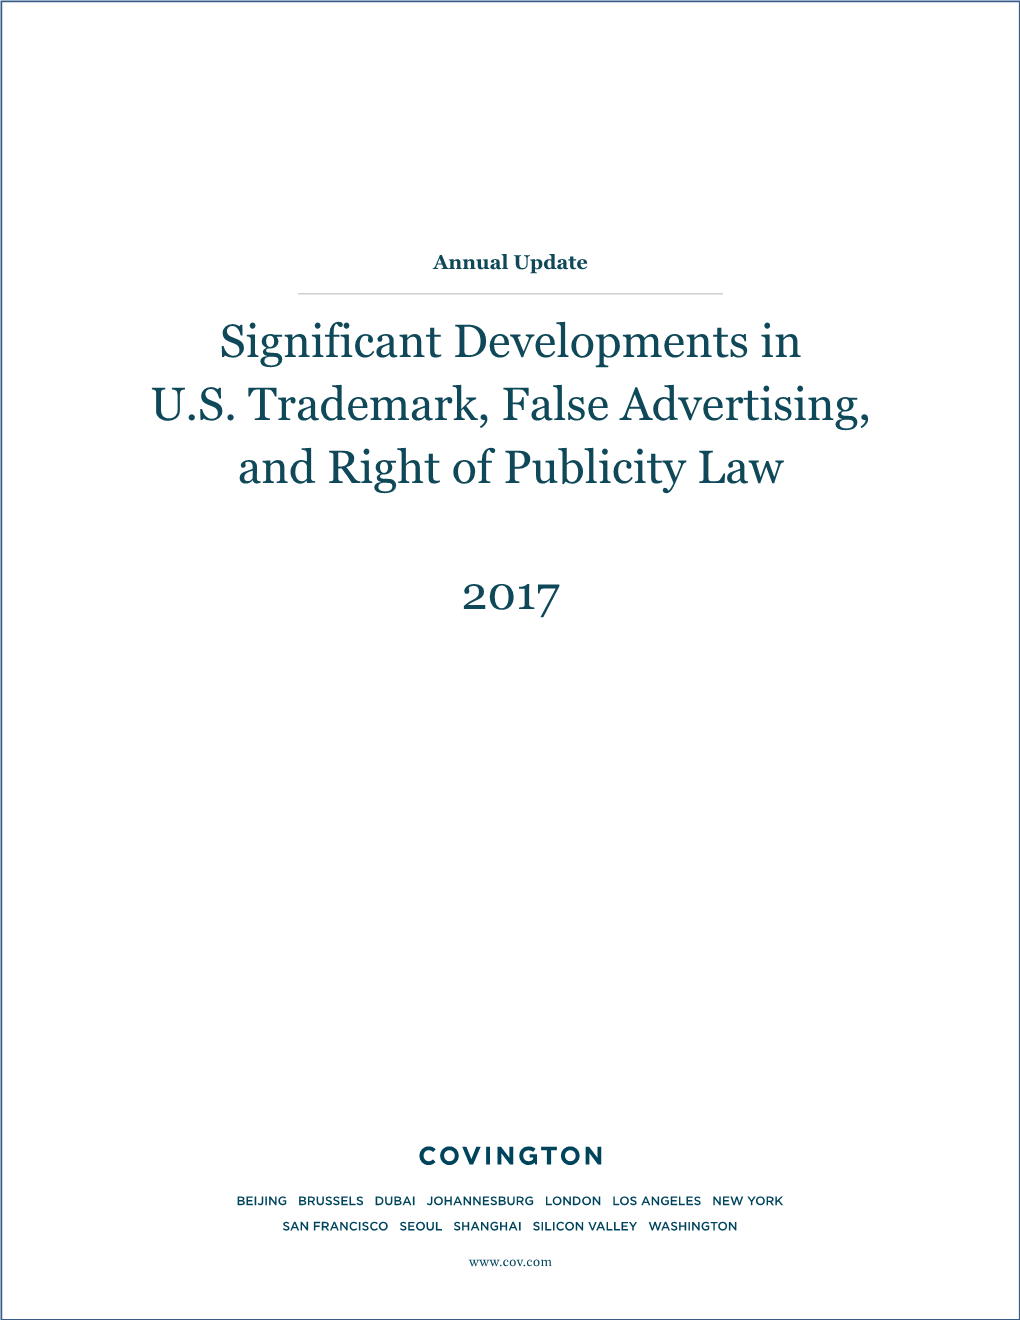 Significant Developments in U.S. Trademark, False Advertising, and Right of Publicity Law 2017